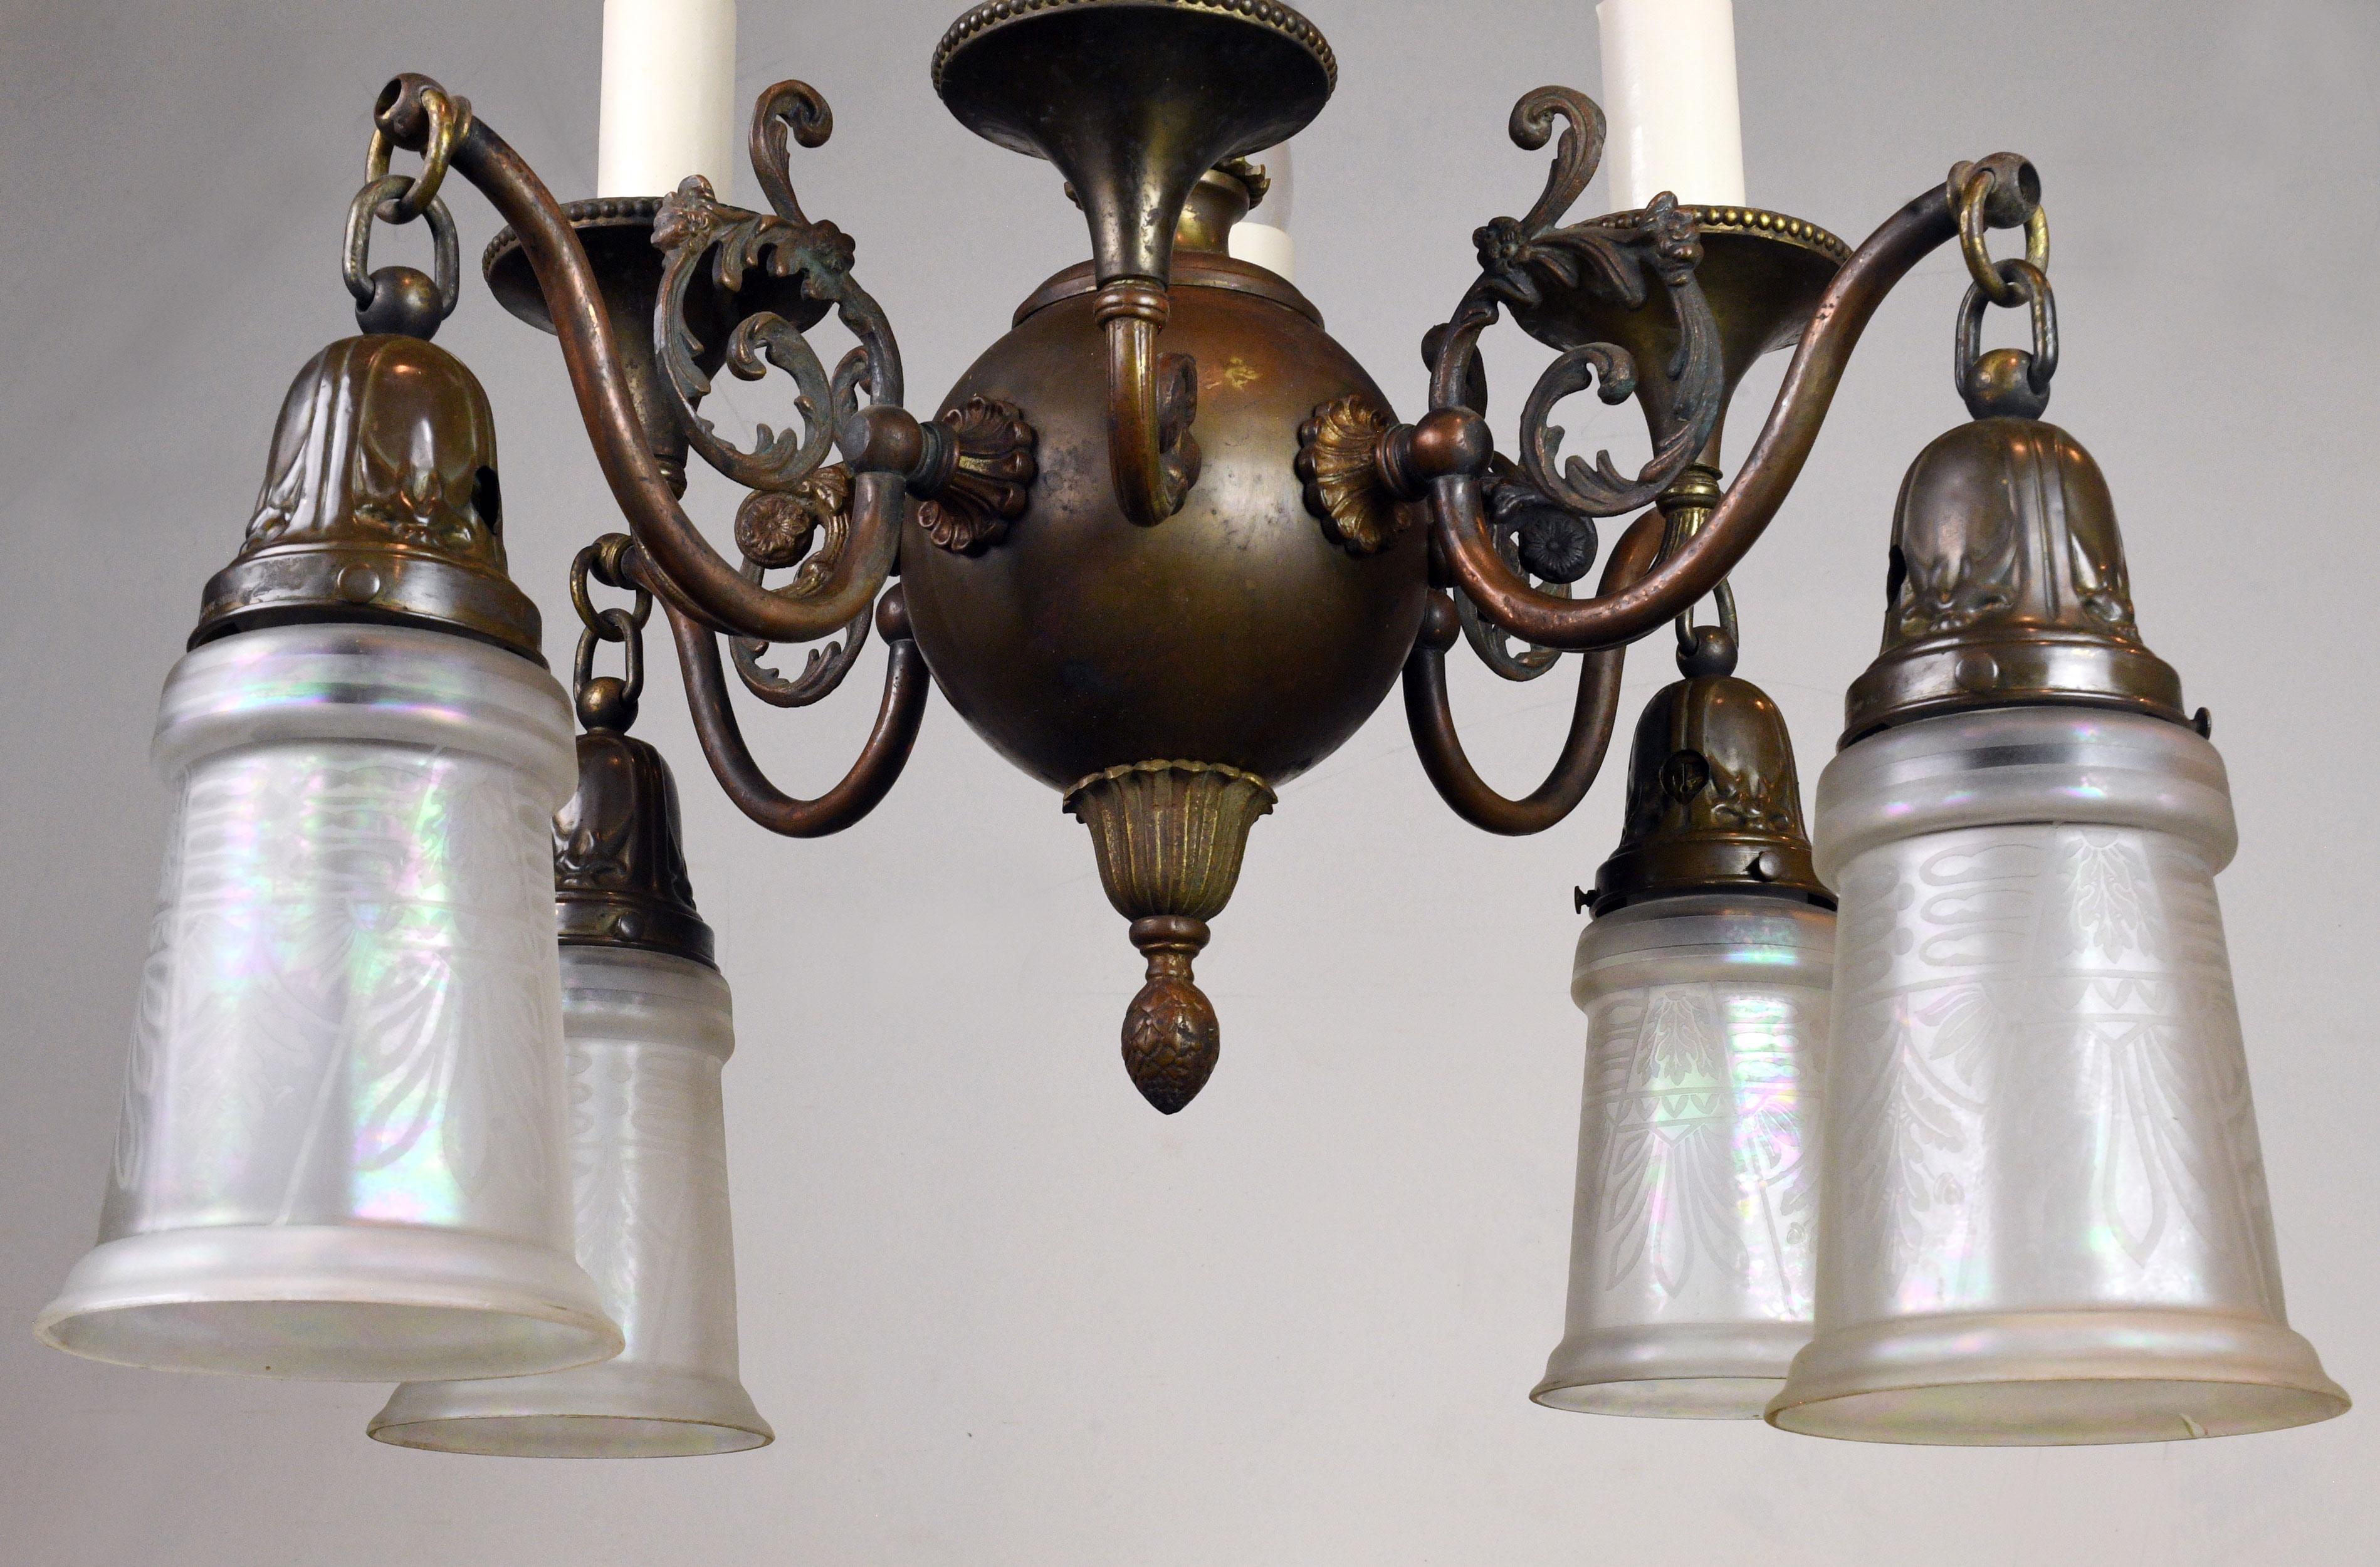 Exquisite brass Beardslee gas/electric chandelier with four candles and four iridescent glass shades. The combination both up and down lighting will provide ample illumination for any number of spaces. The fixture has a beautiful, rich patina: a